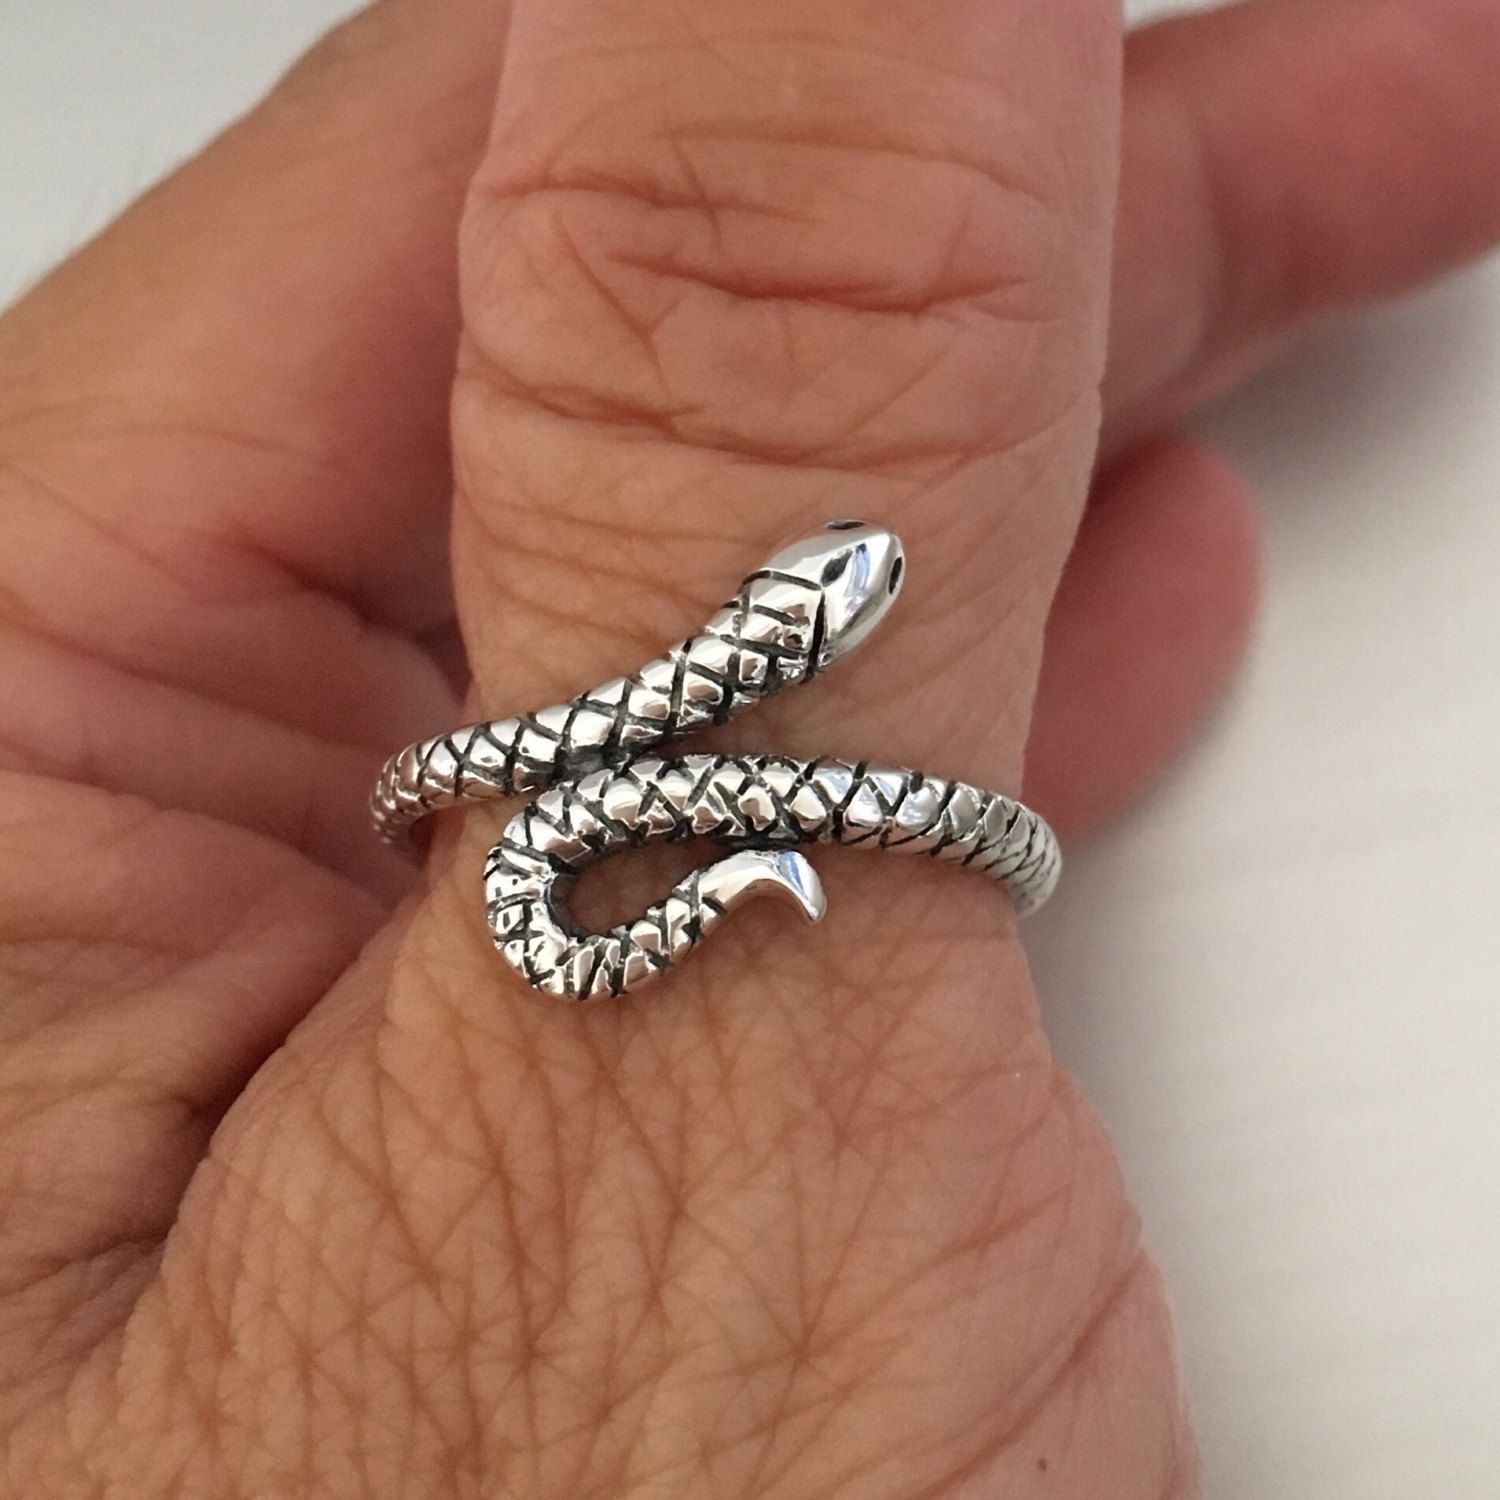 Sterling Silver Snake Ring, Knuckle Ring, Index Ring, Thumb Ring Pertaining To Newest Snake Toe Rings (View 5 of 15)